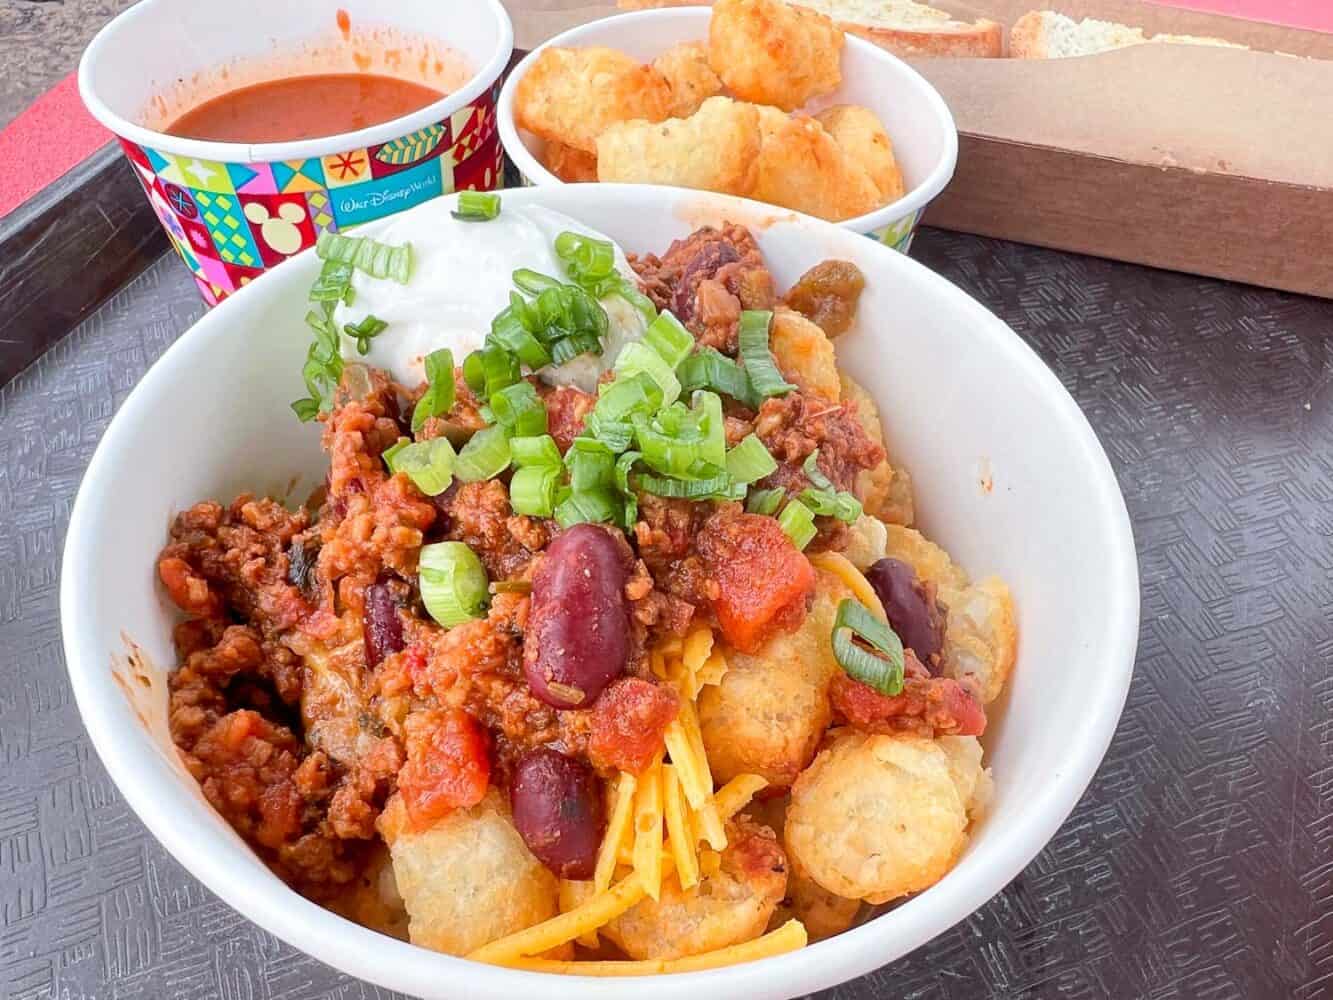 Plant-based chilli on “totchos” with green onion and cheese, Woody's Lunch Box, Hollywood Studios, Disney World, Orlando